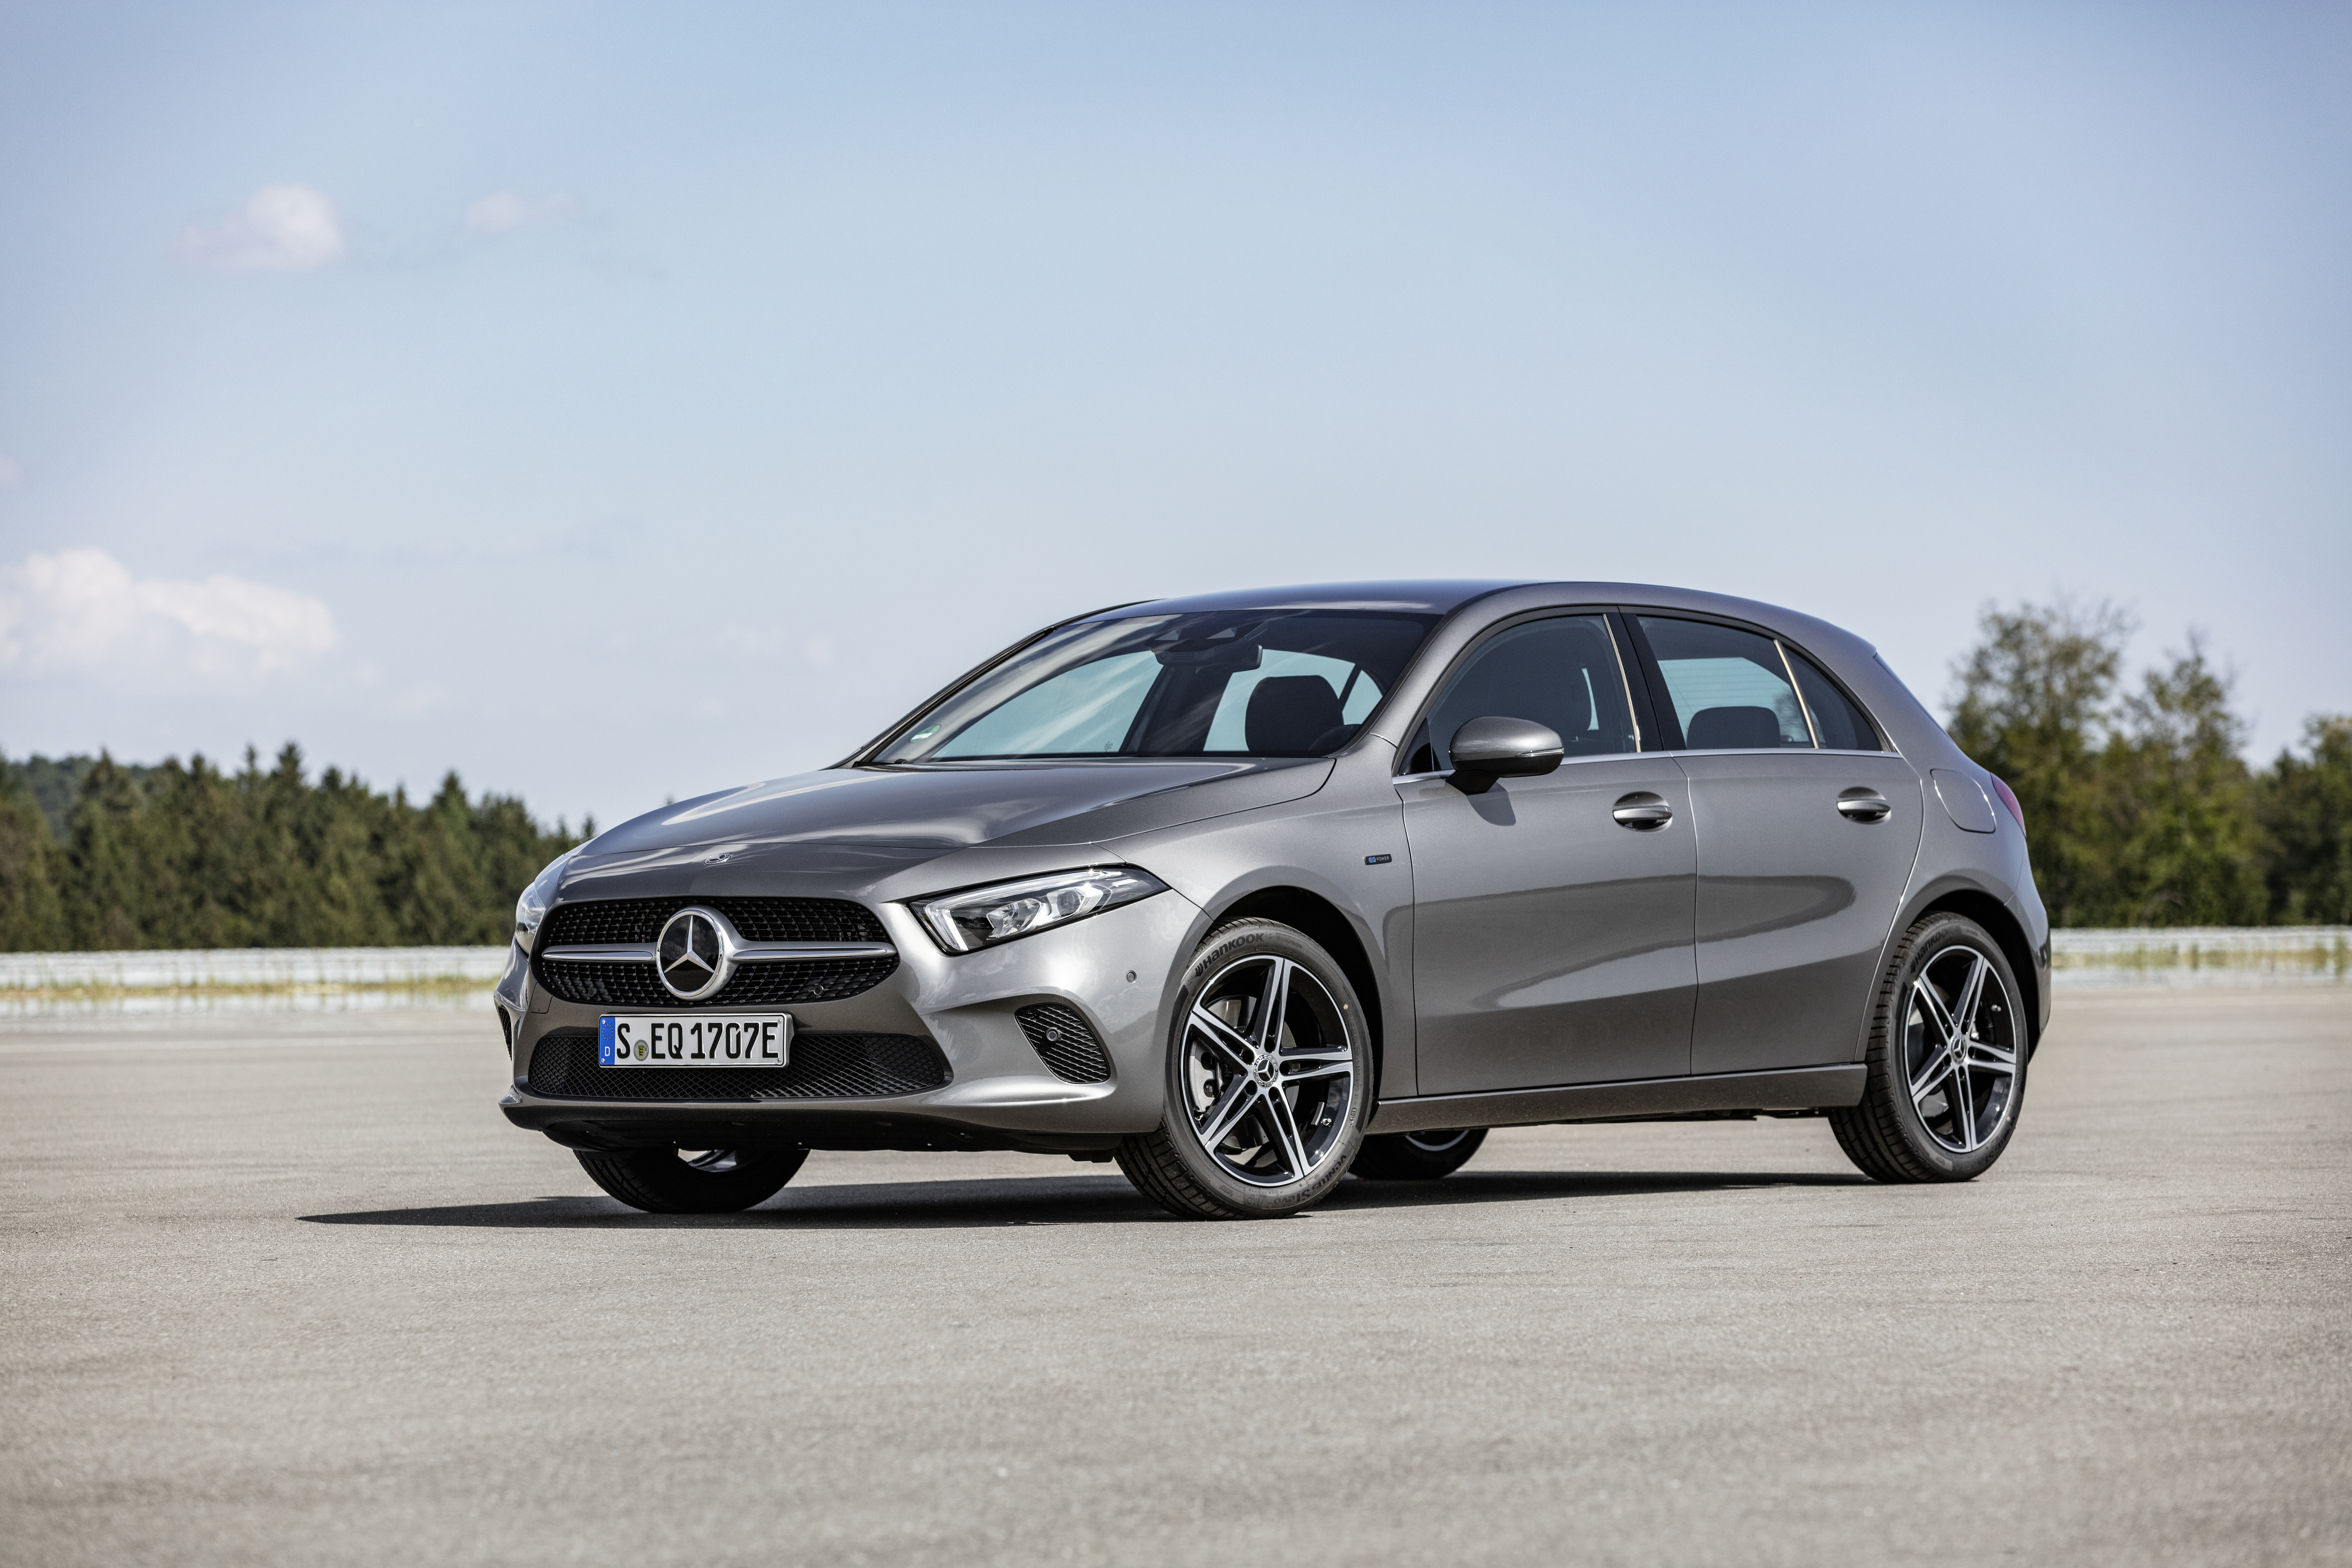 Mercedes-Benz ditches the manual gearbox